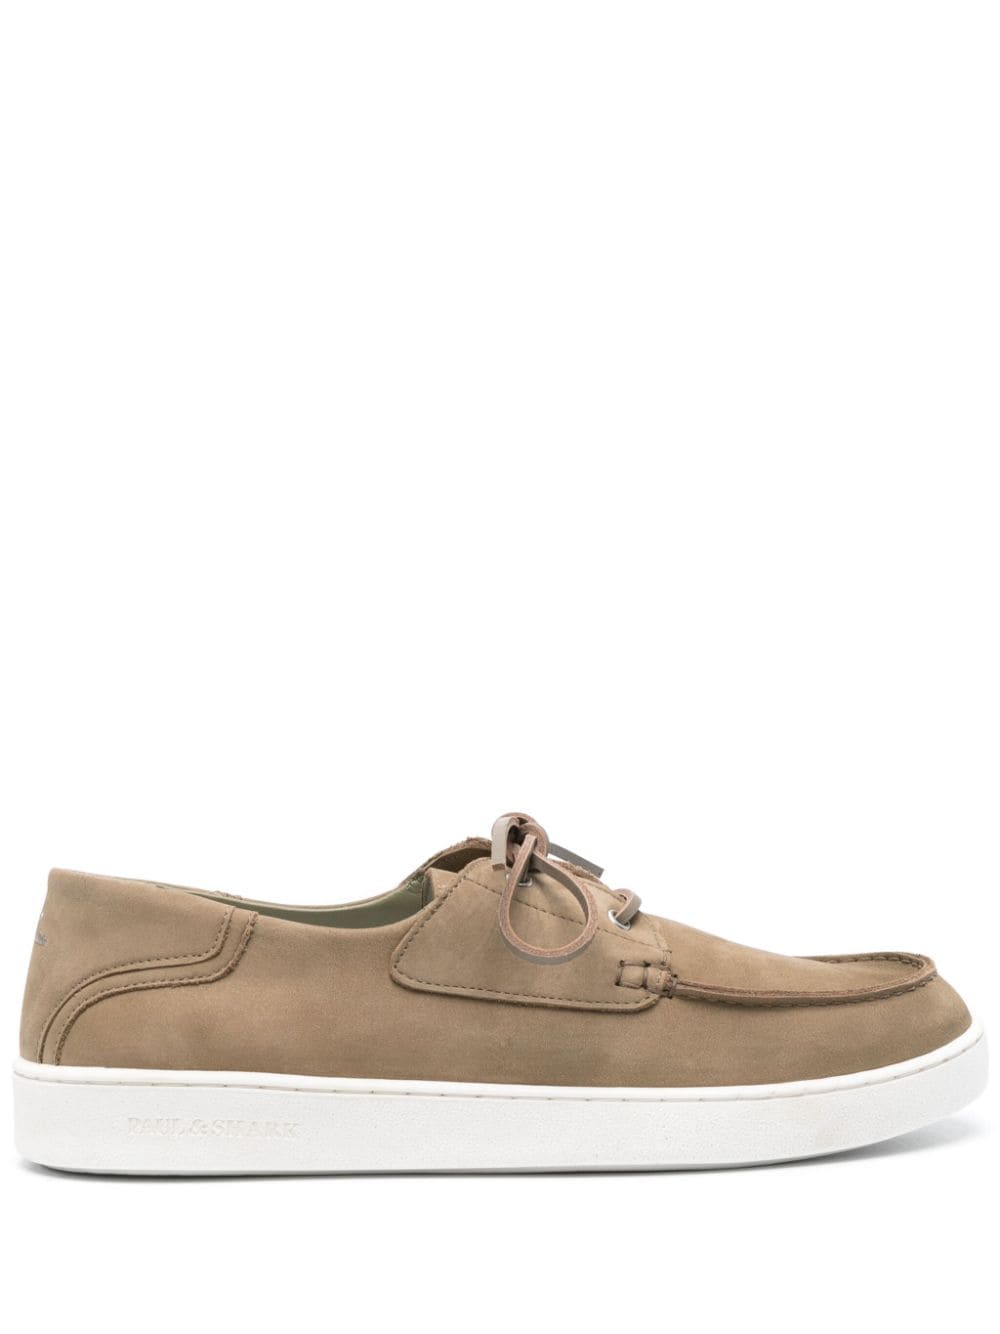 Paul & Shark lace-up suede Boat shoes - Green von Paul & Shark